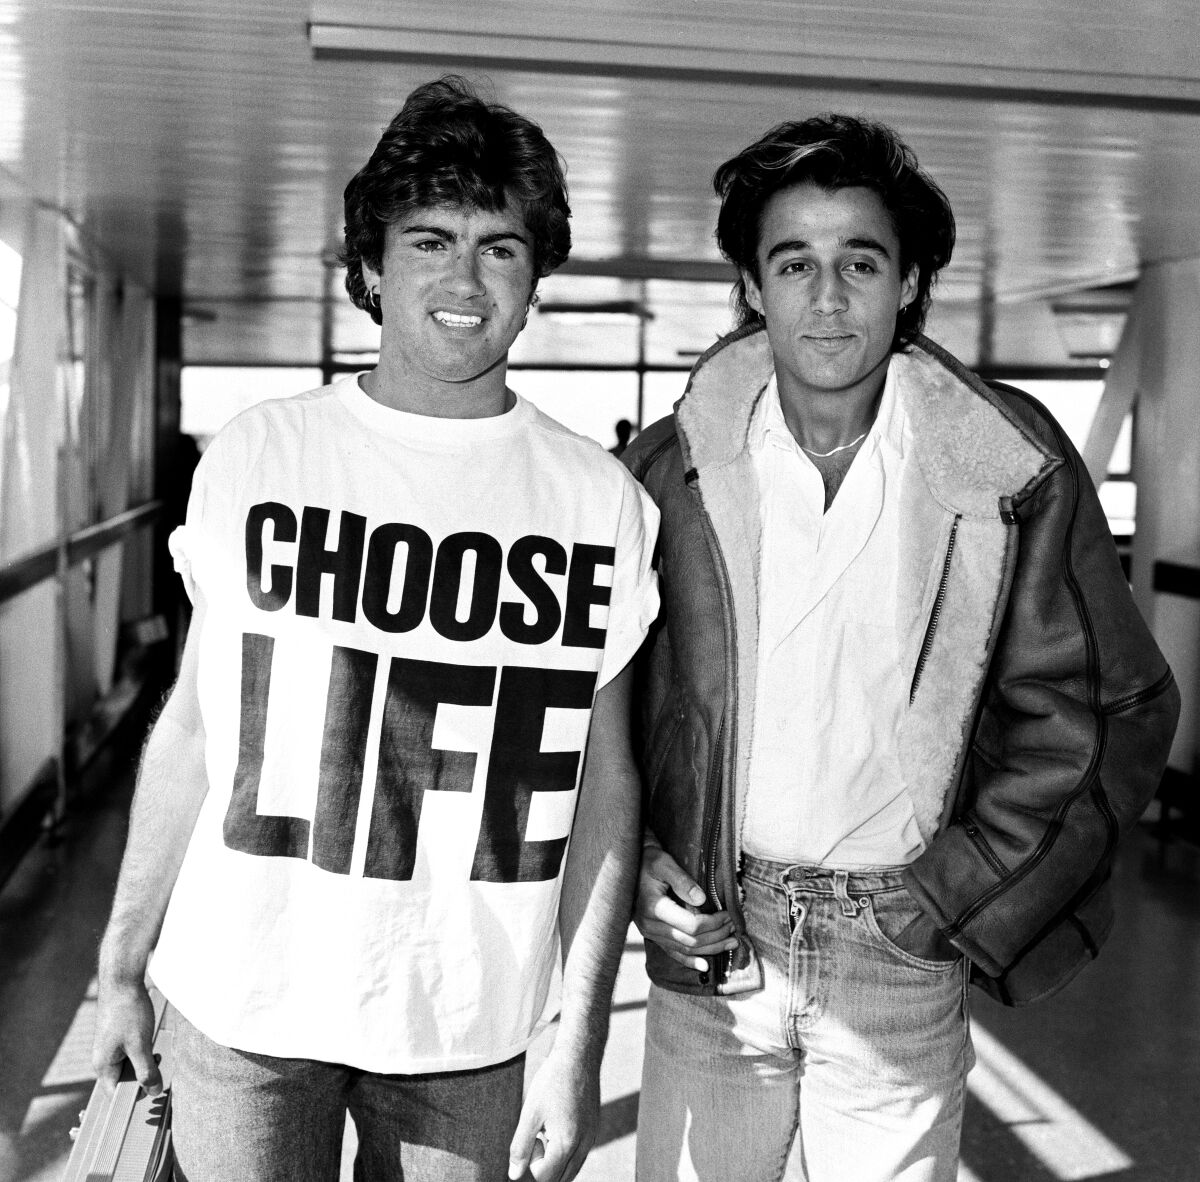 black and white photo of two men, the one on the left wearing a shirt saying "choose life"